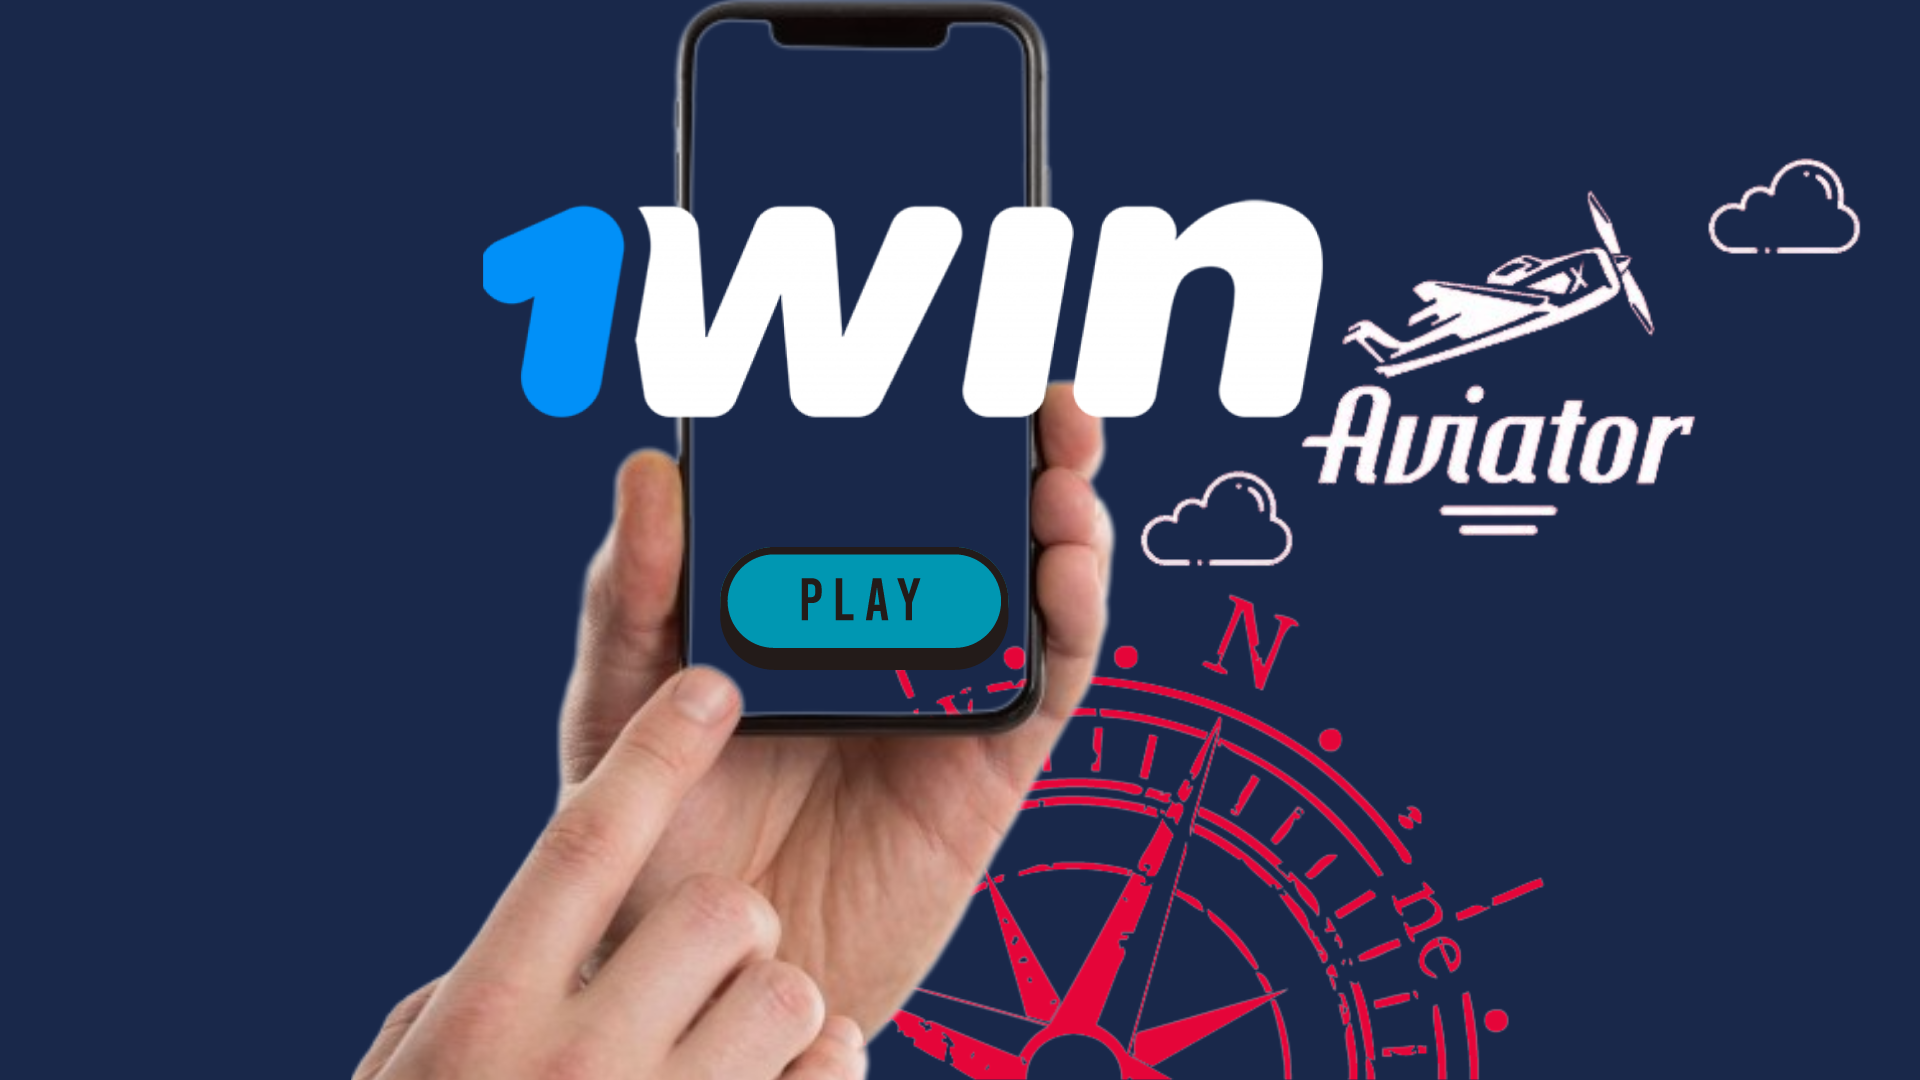 A hand holding a smart phone with the word 1win aviator game
